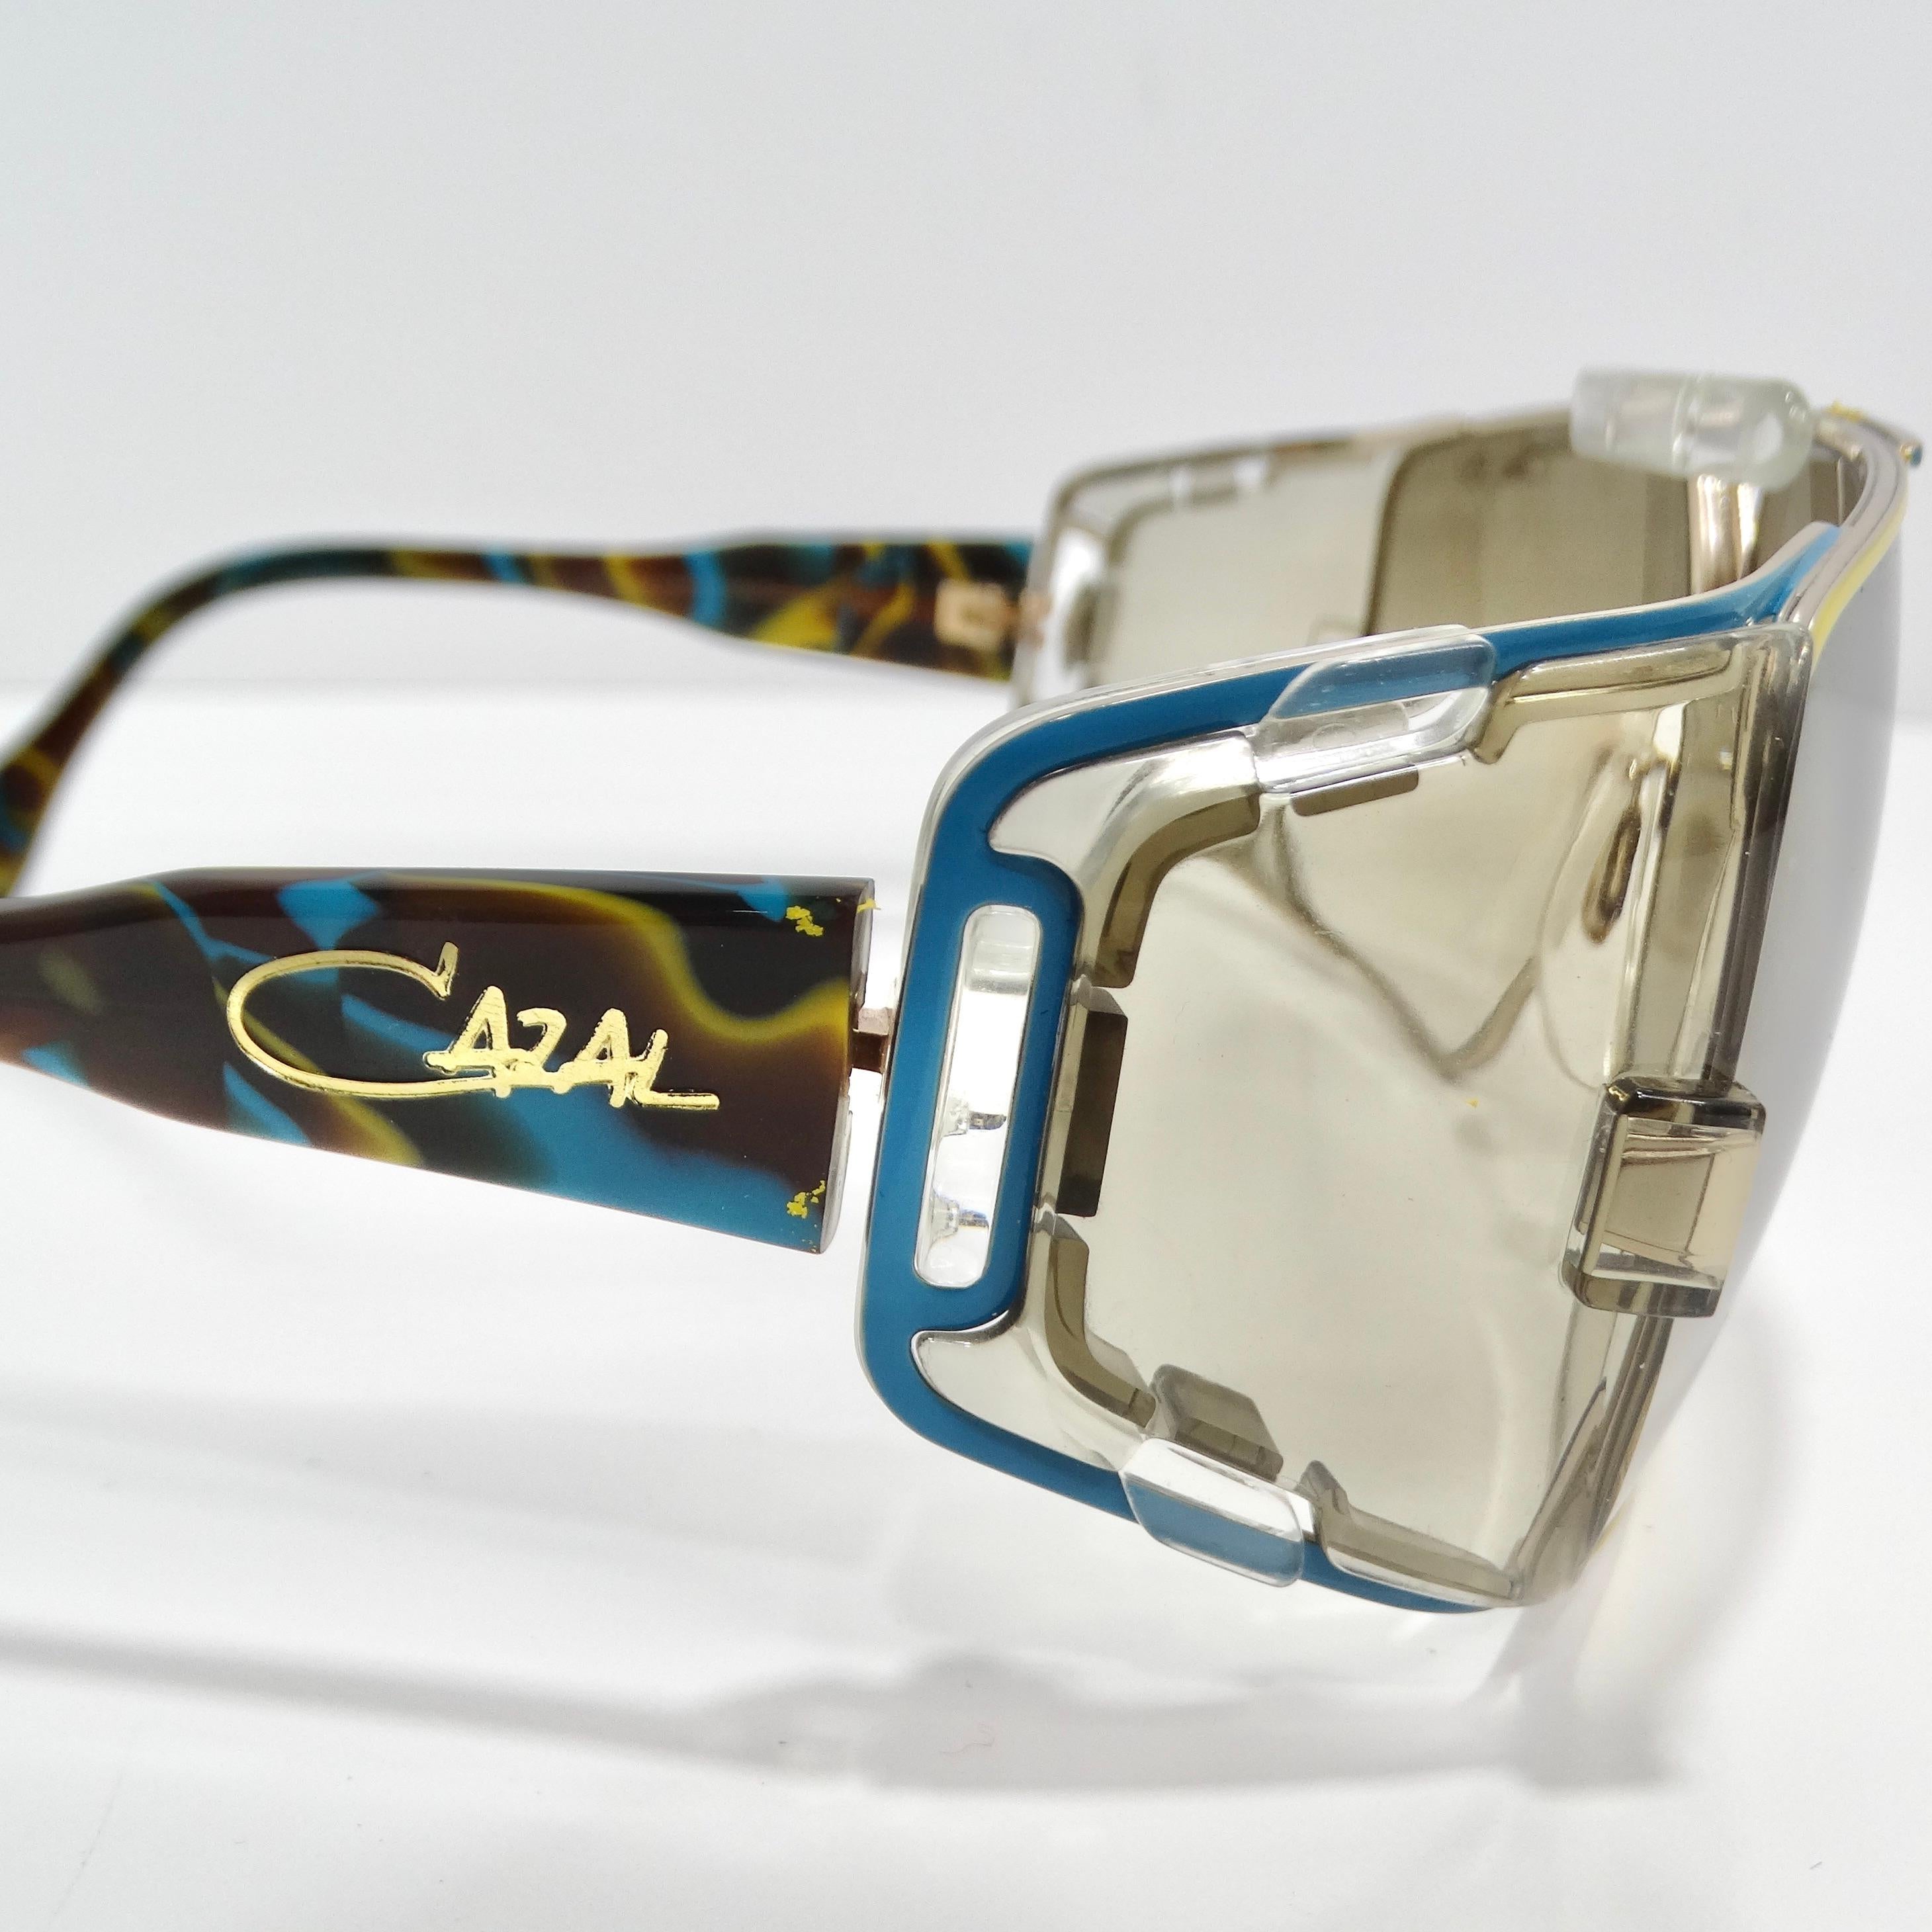 Cazal 951 Limited Edition Sunglasses For Sale 1